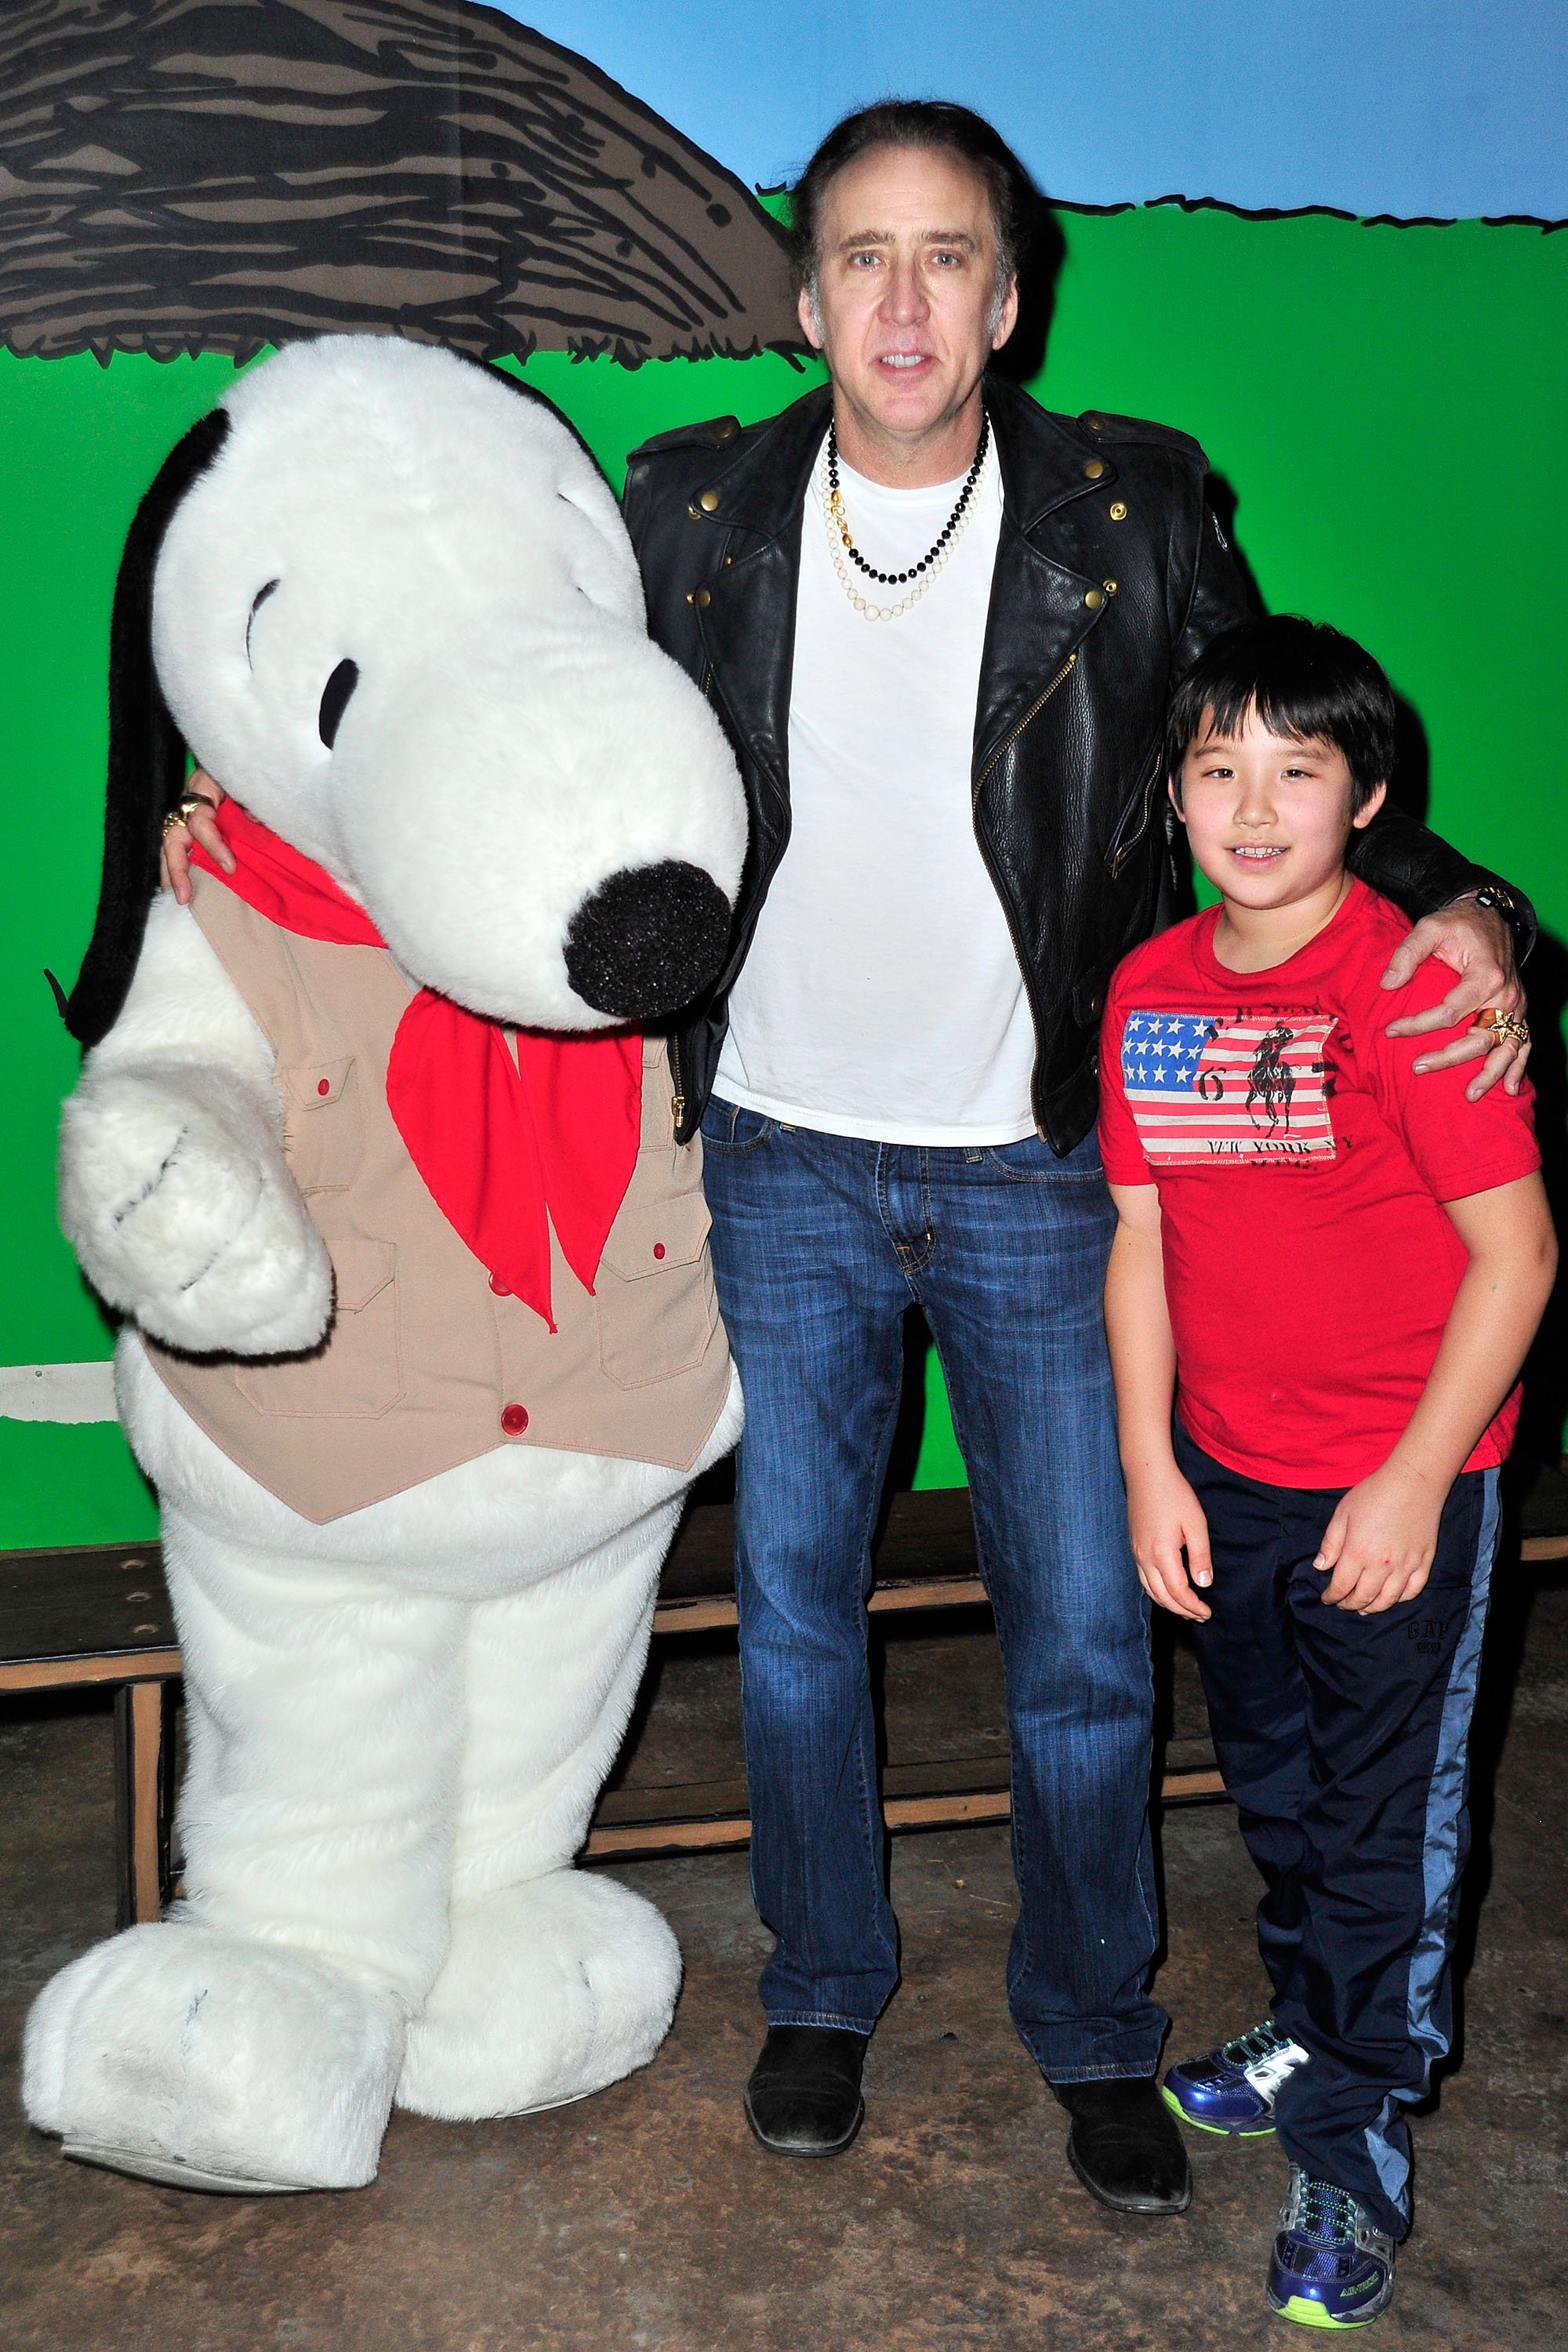 Actor Nicolas Cage and son Kal-El Cage visit Knott's Berry Farm on September 12, 2015 in Buena Park, California. | Source: Getty Images